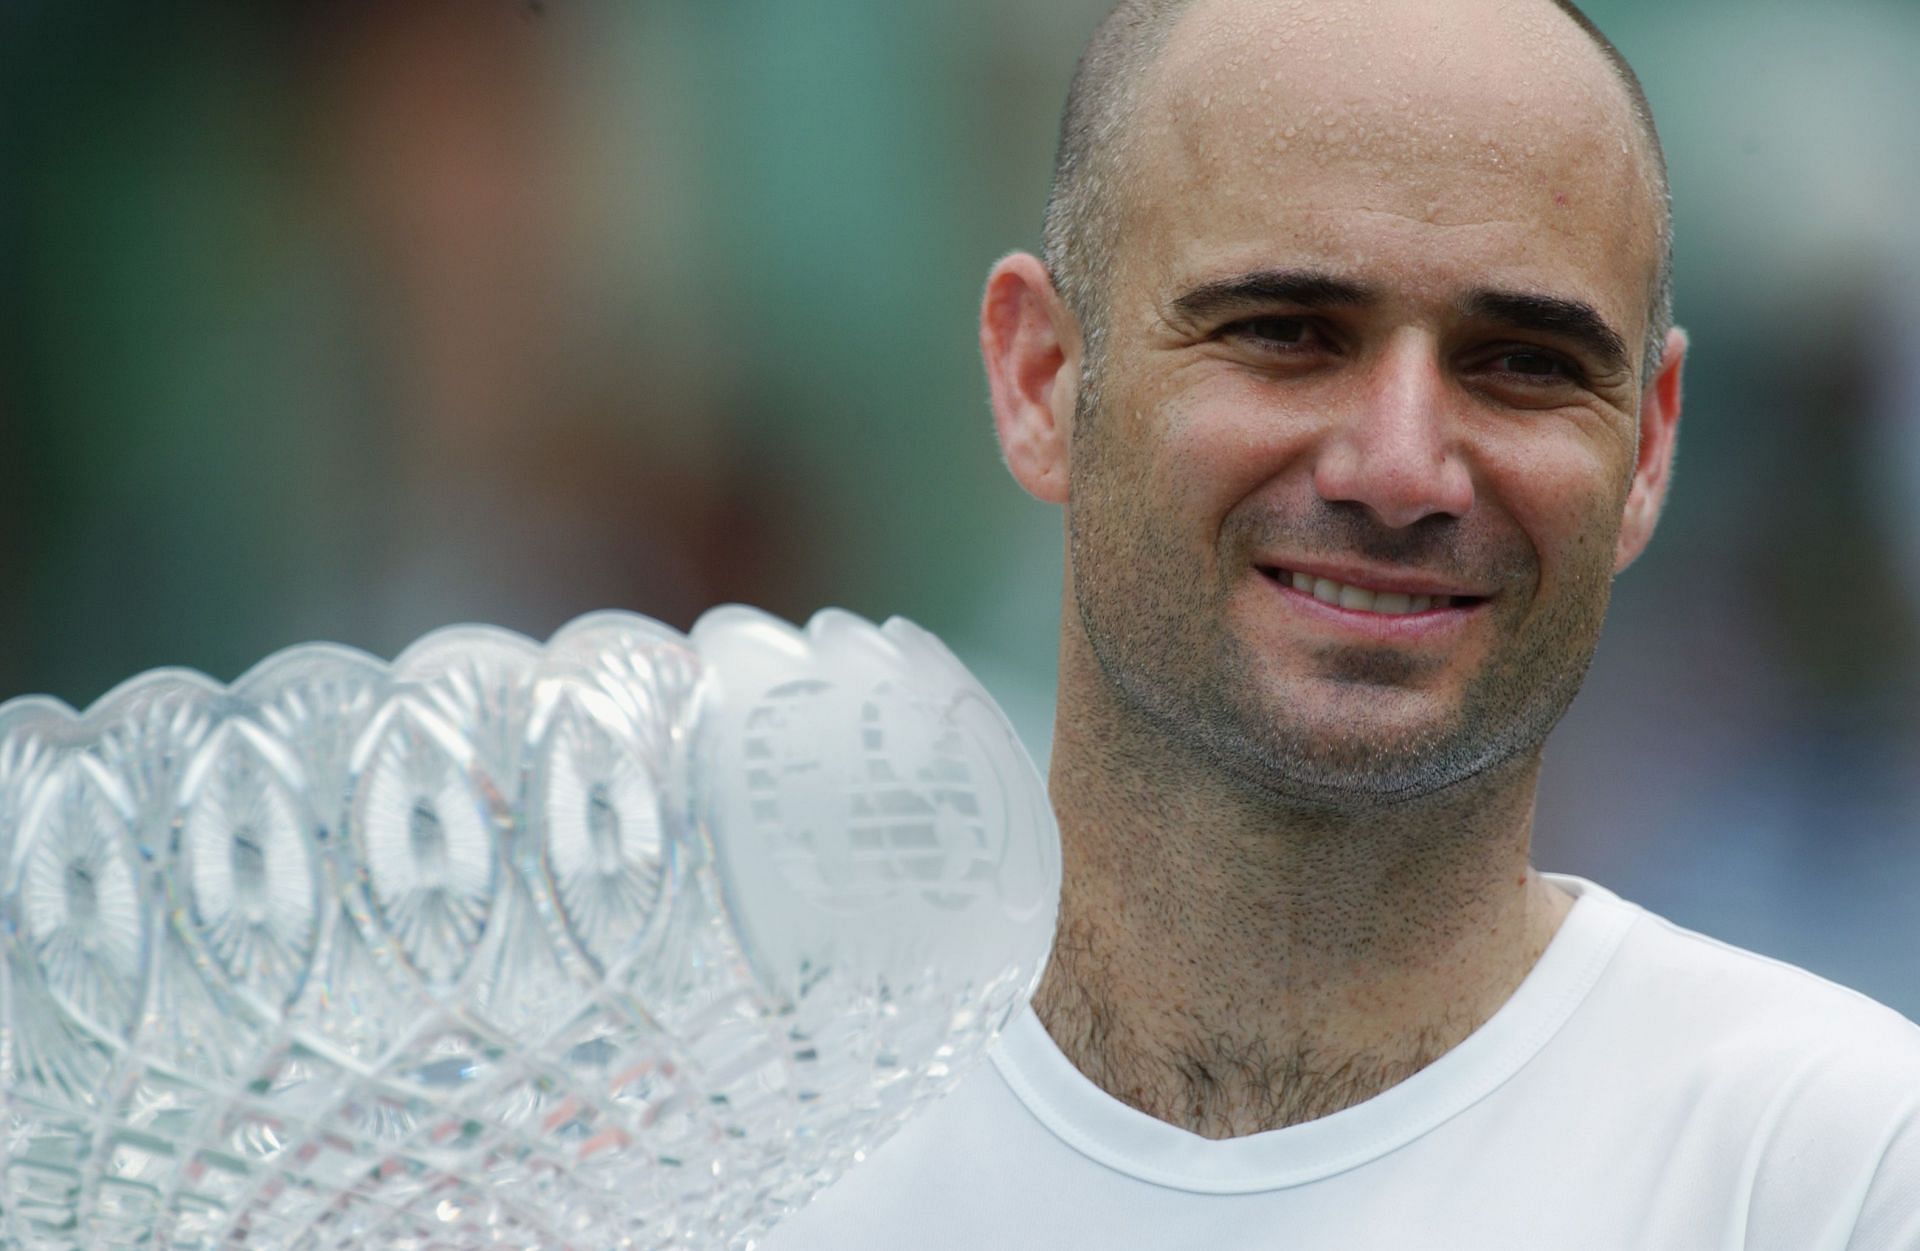 Andre Agassi at the 2003 Miami Open